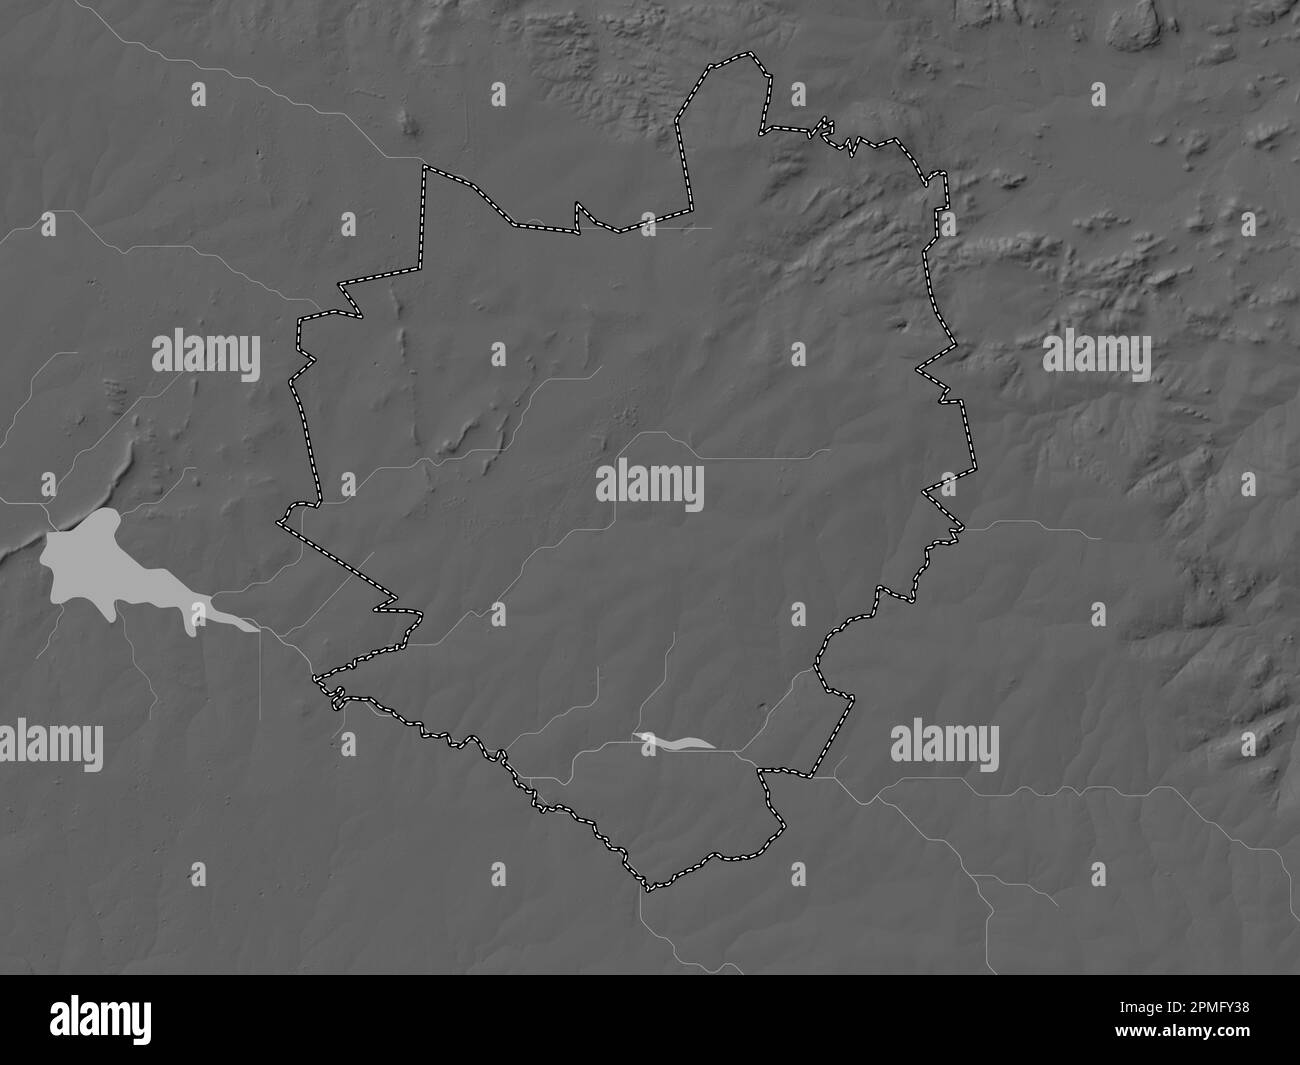 Harare, city of Zimbabwe. Grayscale elevation map with lakes and rivers Stock Photo